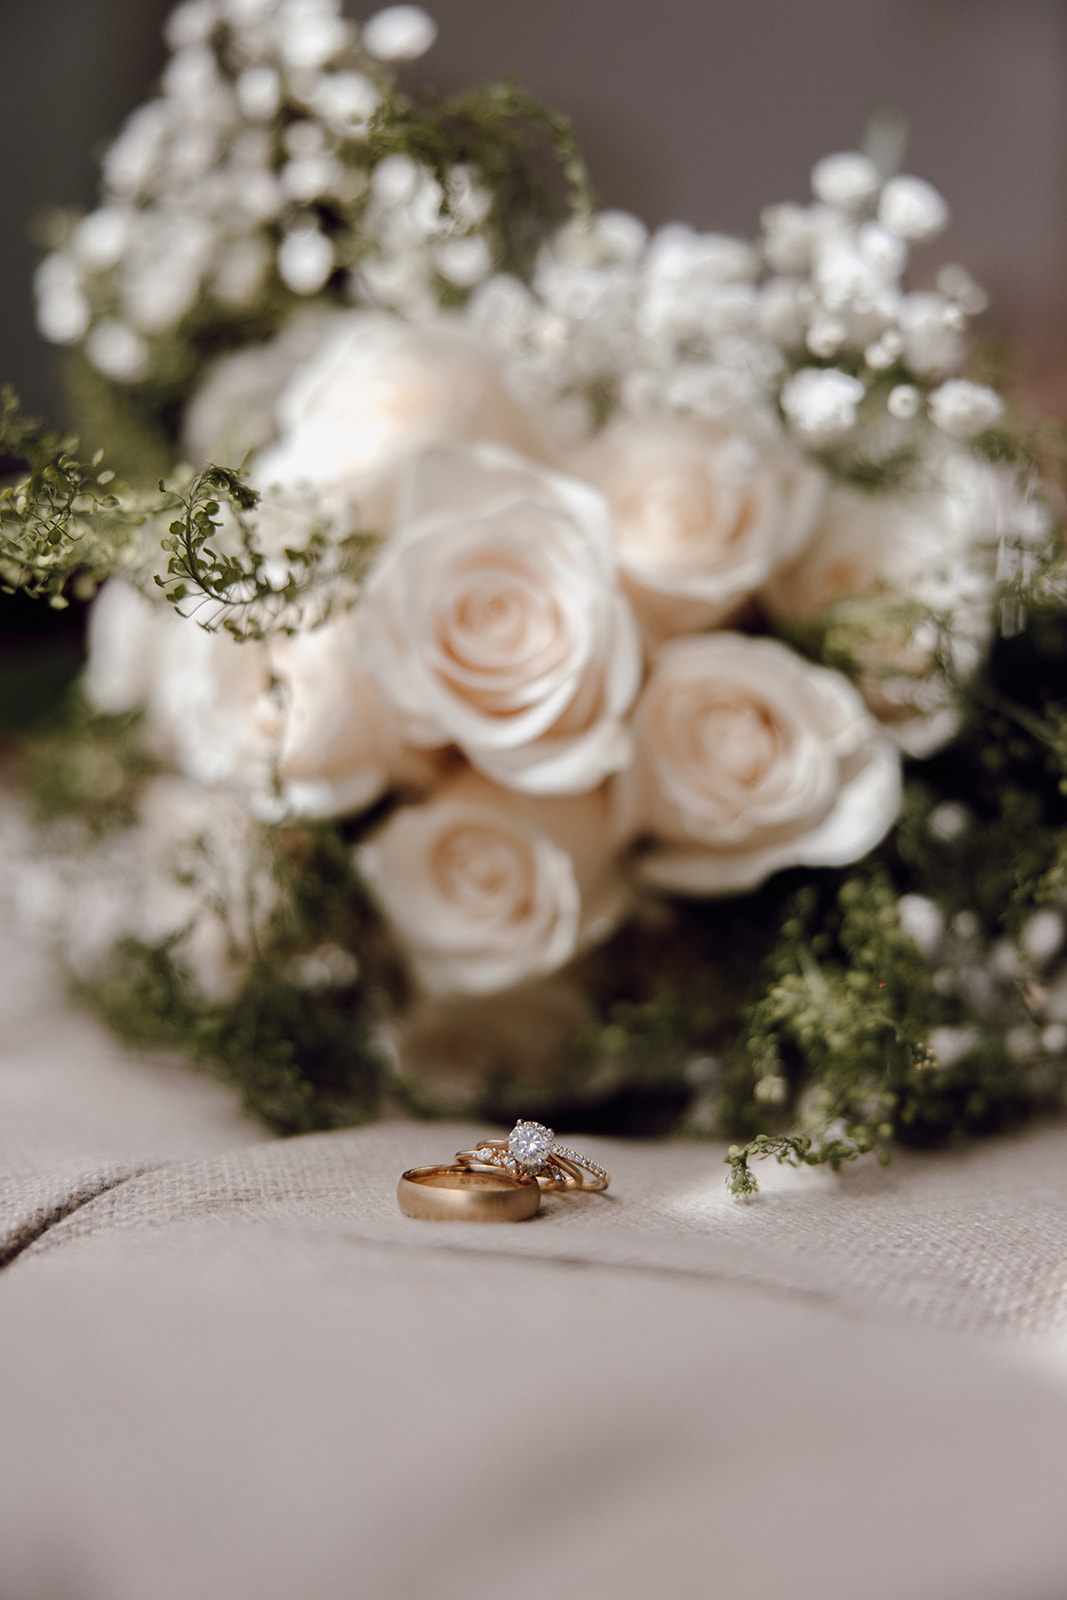 the wedding details with the white wedding bouquet and wedding rings